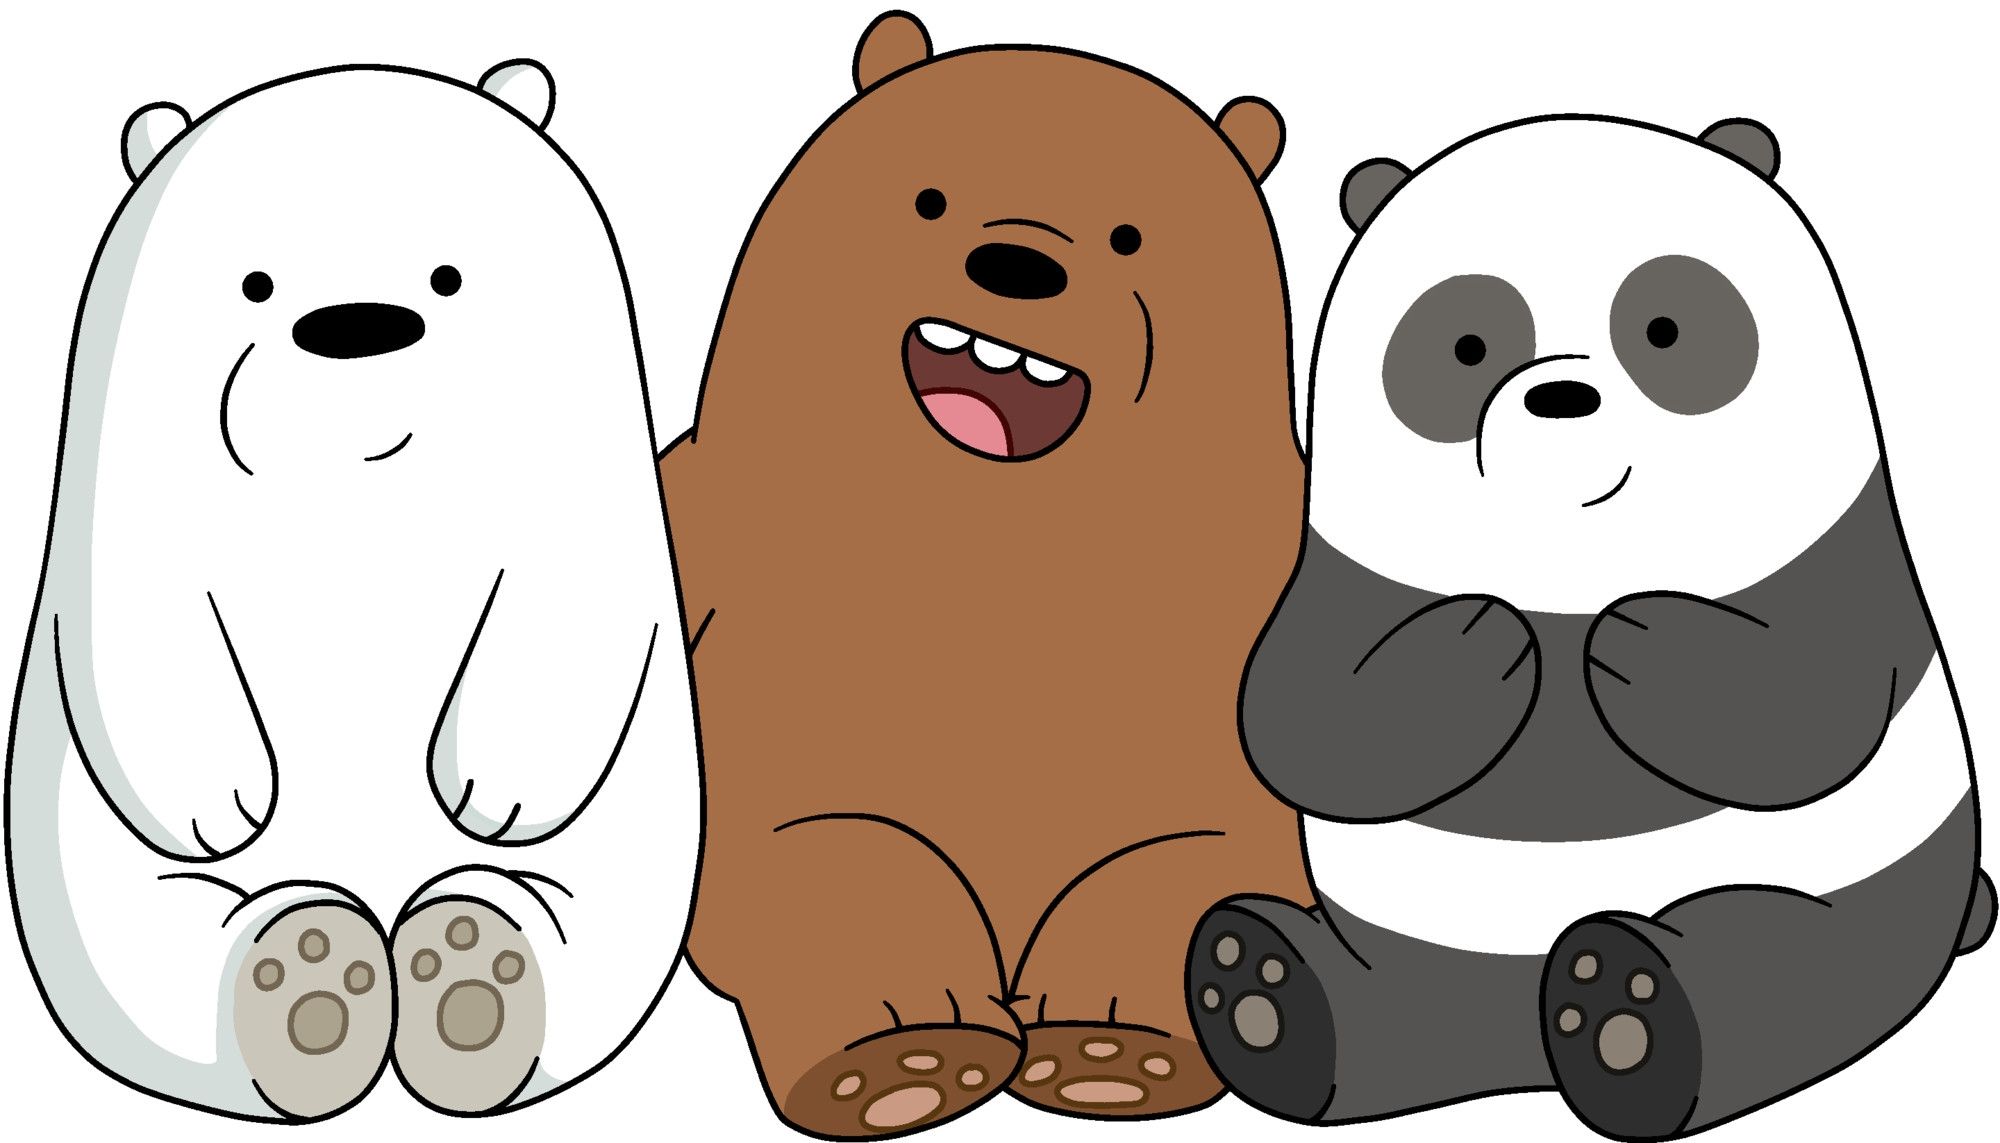 We Bare Bears Wallpaper Image With The Most Awesome